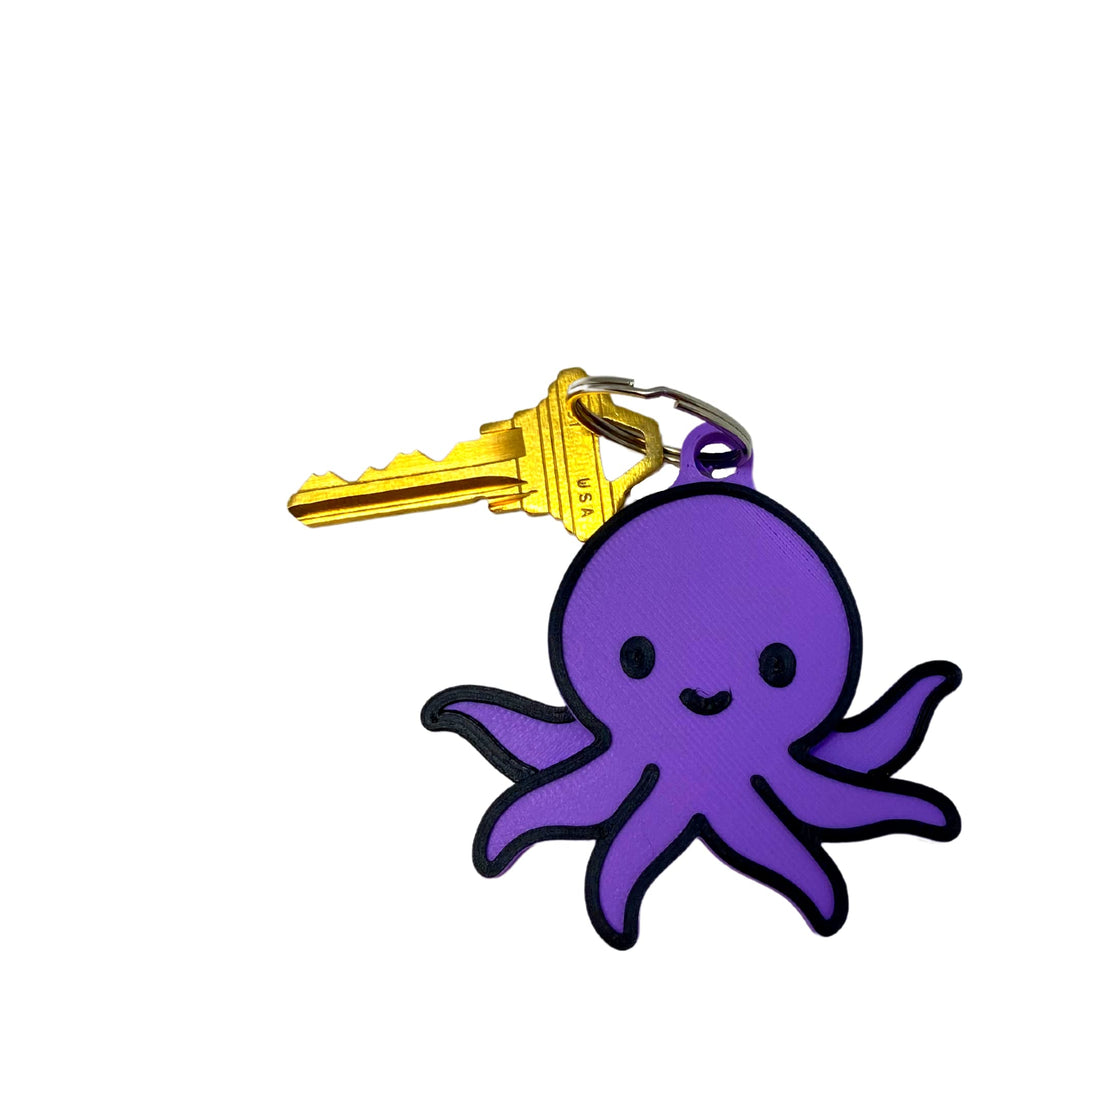 Kawaii Cute Octopus Keychain - Perfect for Hanging your keys. - Decorate your Backpacks, Lunchboxes, Luggage, & Tote Bags Octopus